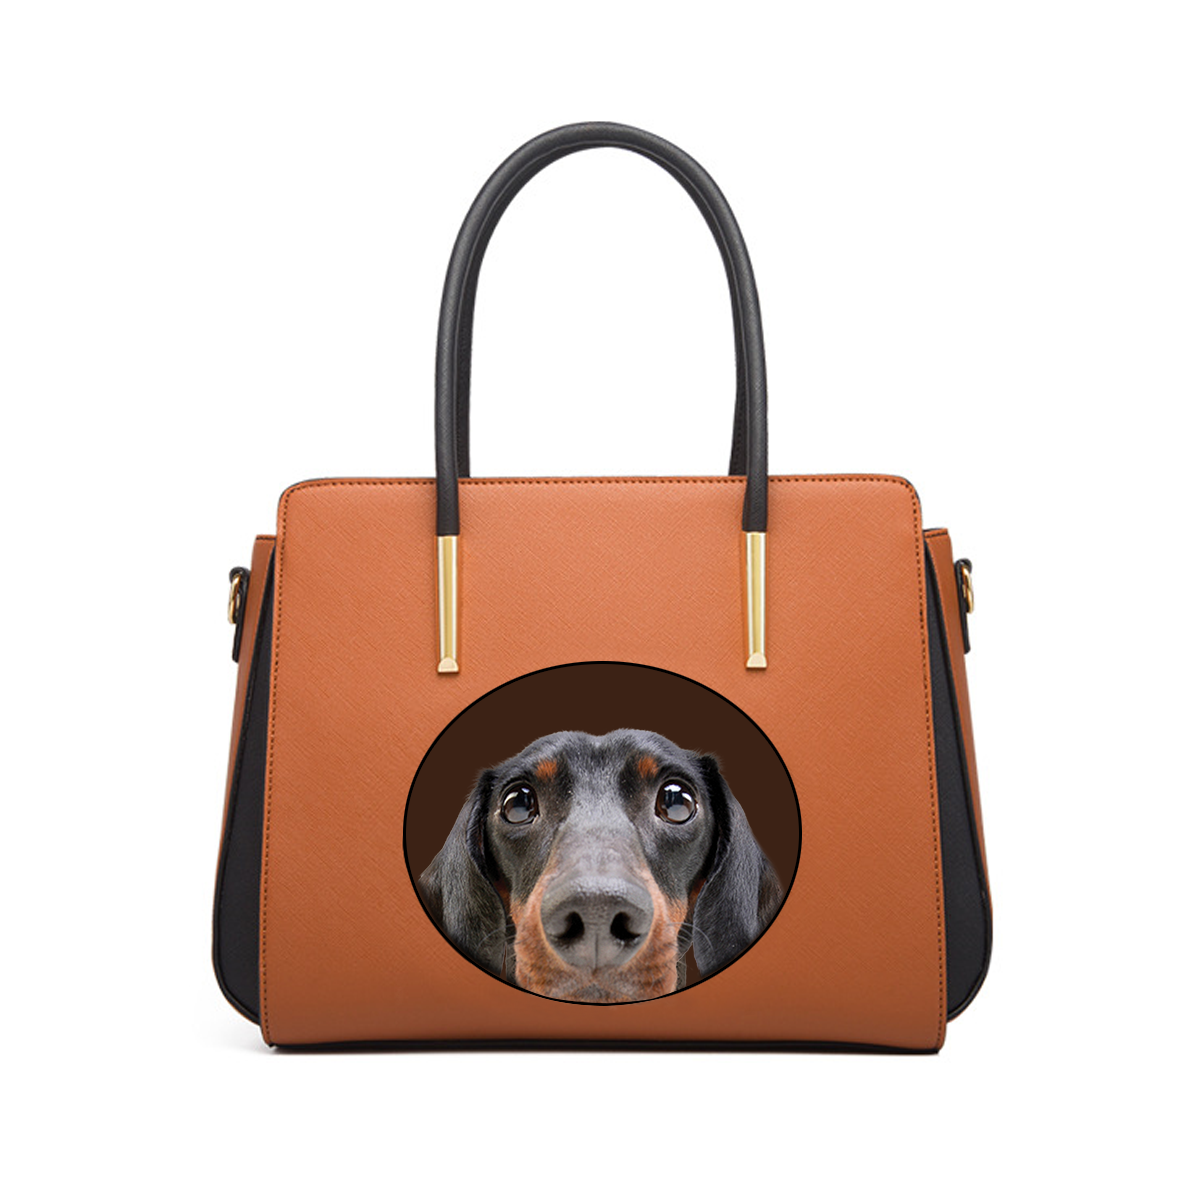 Guess Who I Am - Personalized Classic Handbag With Your Pet's Photo V1